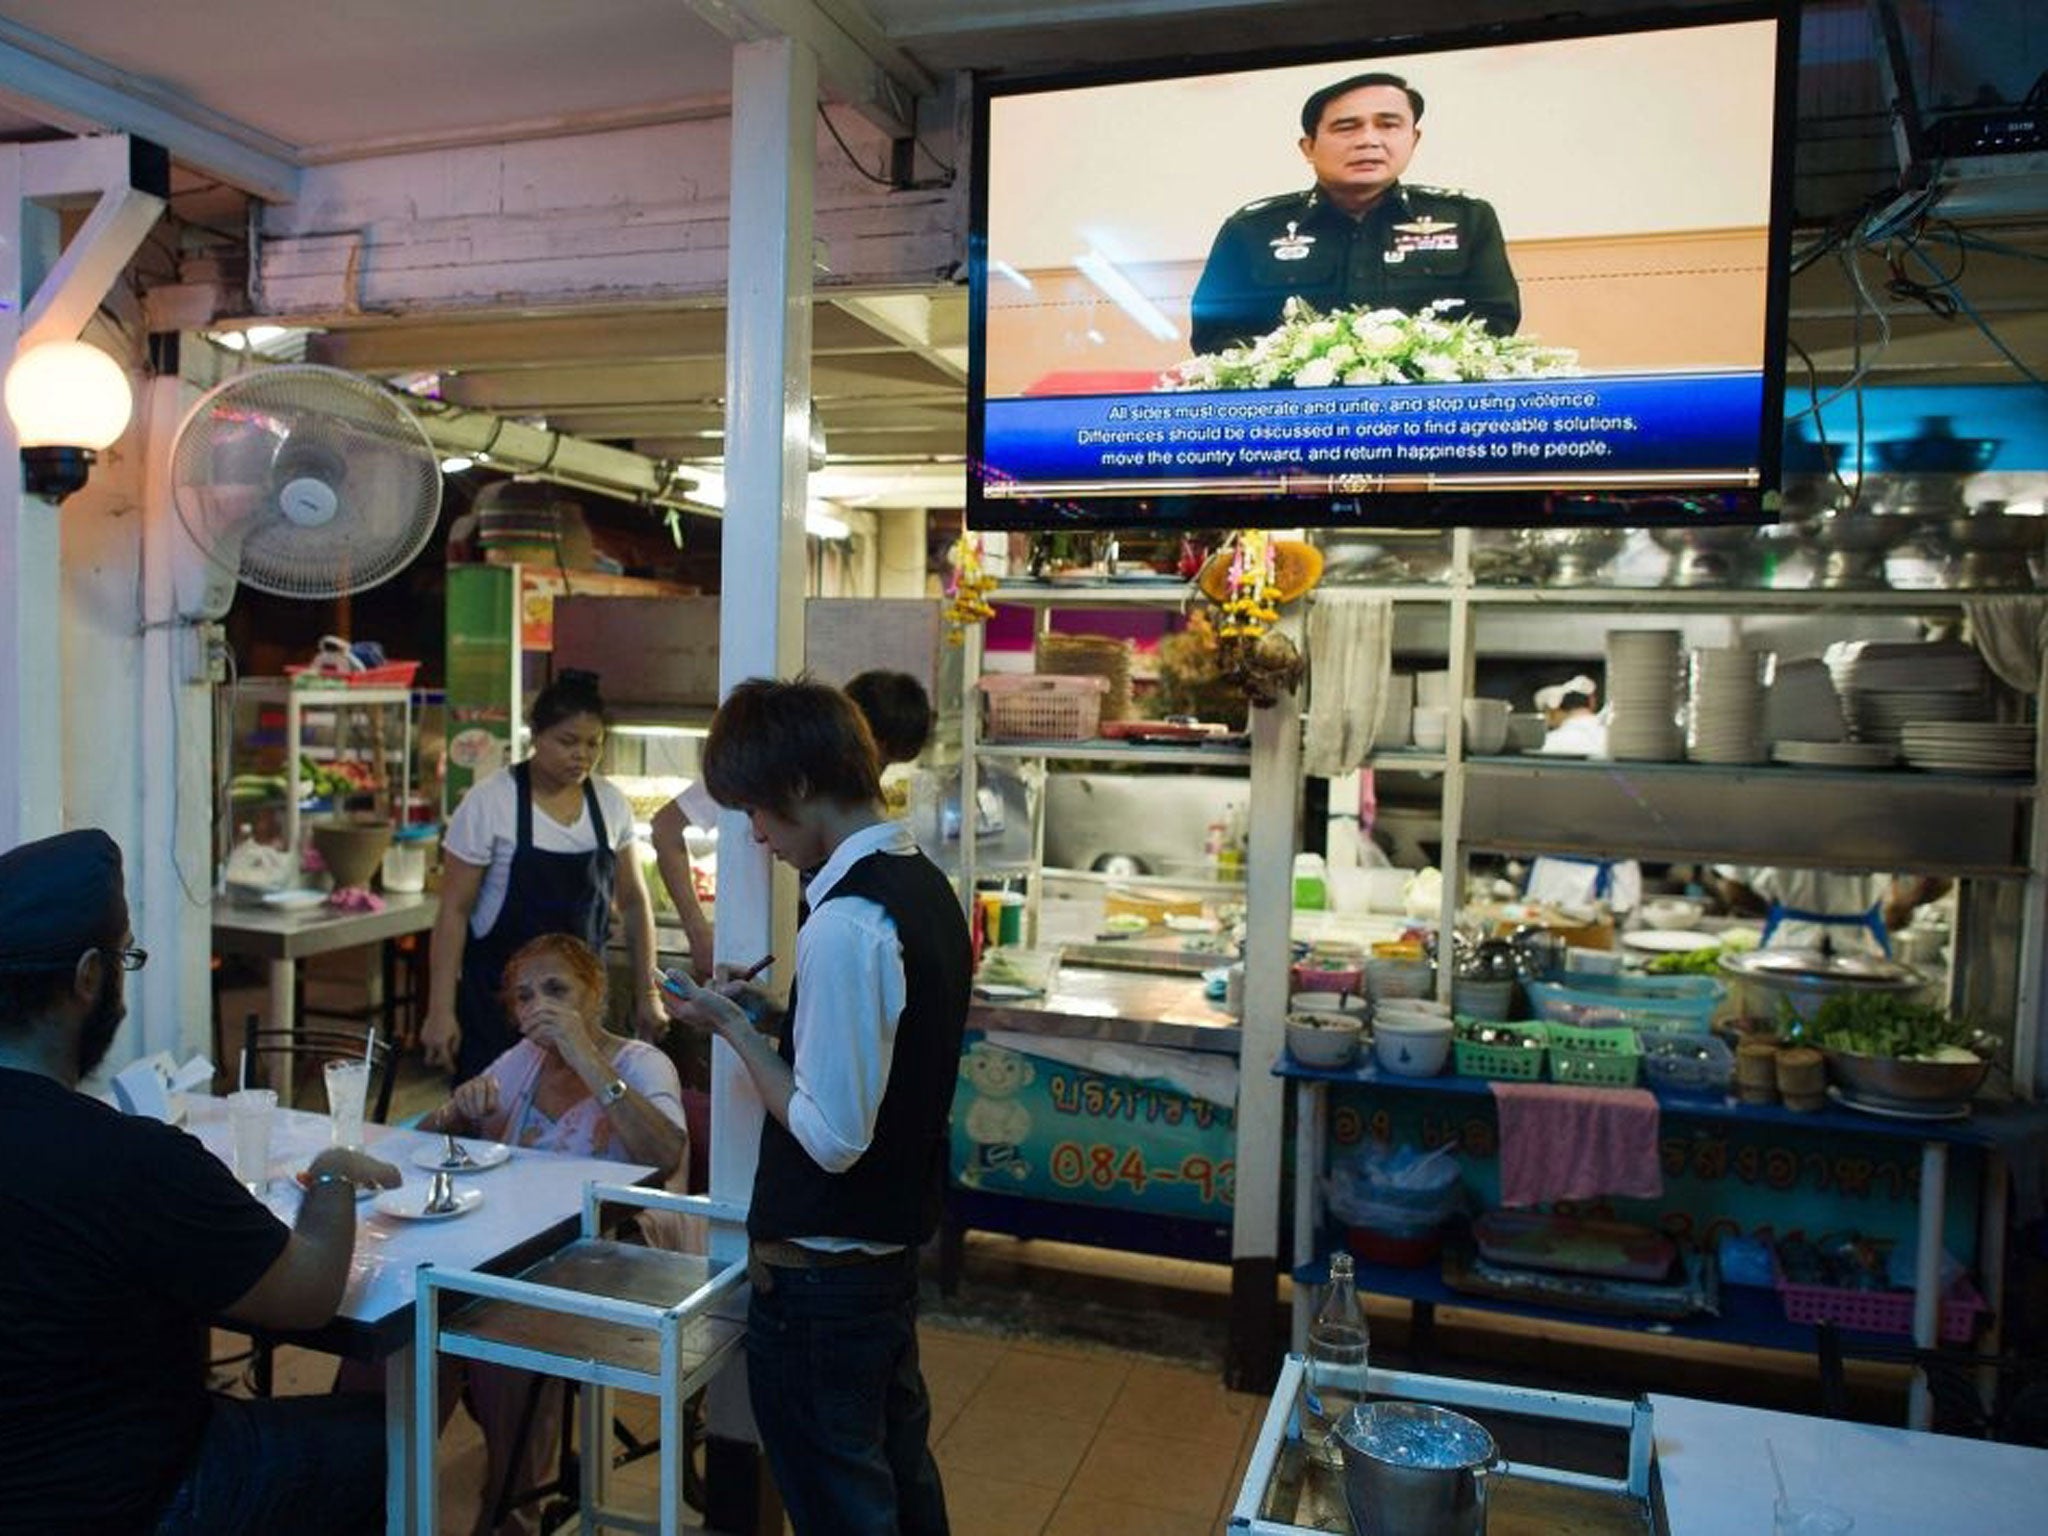 Thai army chief General Prayut Chan-O-Cha is seen making a speech on a television set as a waiter takes an order at a Thai restaurant in Bangkok on 30 May 2014. The European Union voiced 'extreme concern' about political detentions and censorship in Thail